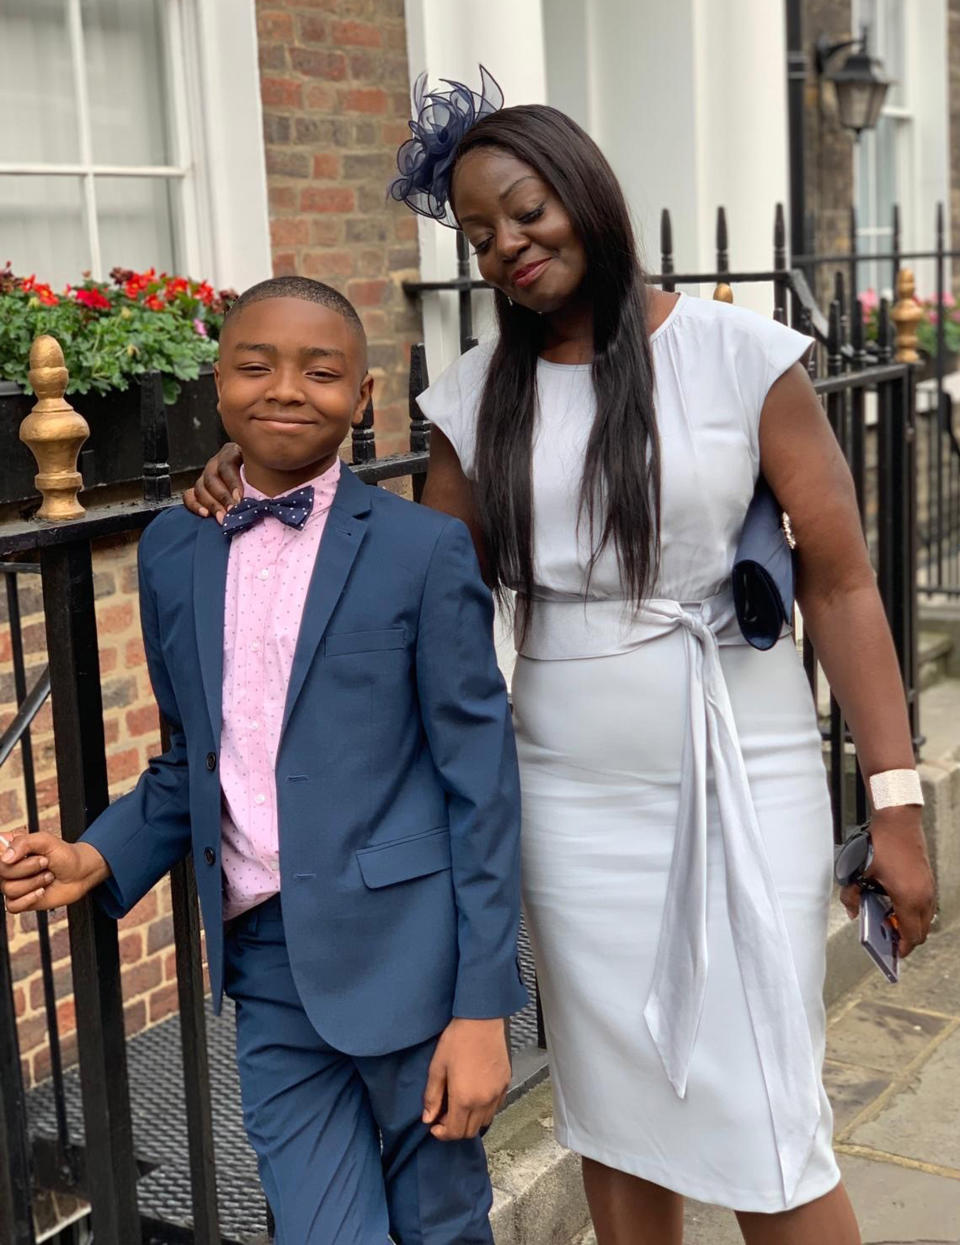 Undated handout photo issued by Alice Agyepong of her with her son Kai who was arrested by police while playing with a toy gun believing it to be real.